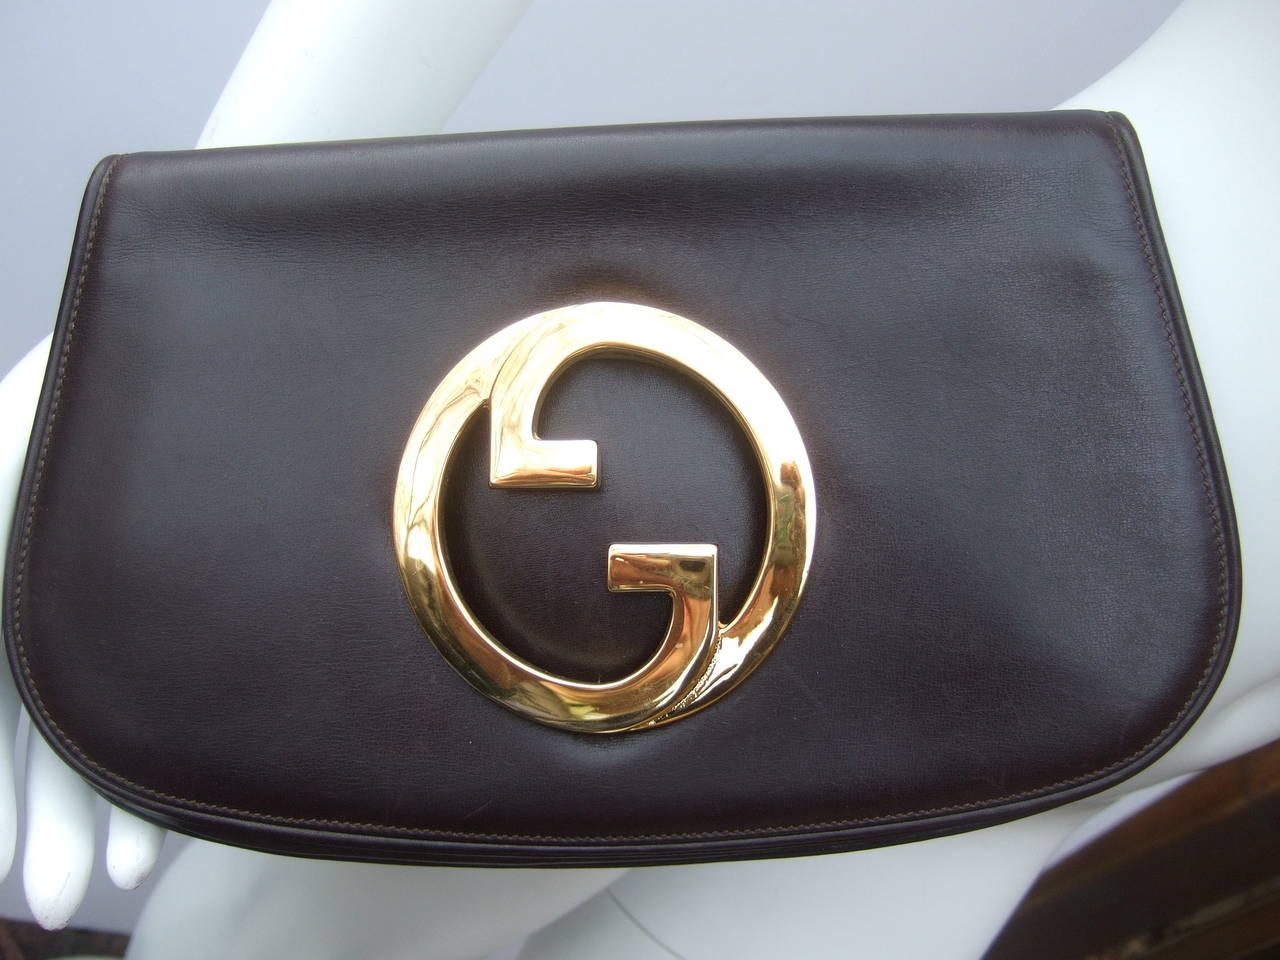 Gucci Iconic chocolate brown leather blondie clutch c 1970
The chic retro clutch bag is covered with dark brown
leather adorned with Gucci's massive gilt metal initials

The border edges are designed with subtle restrained stitching
The